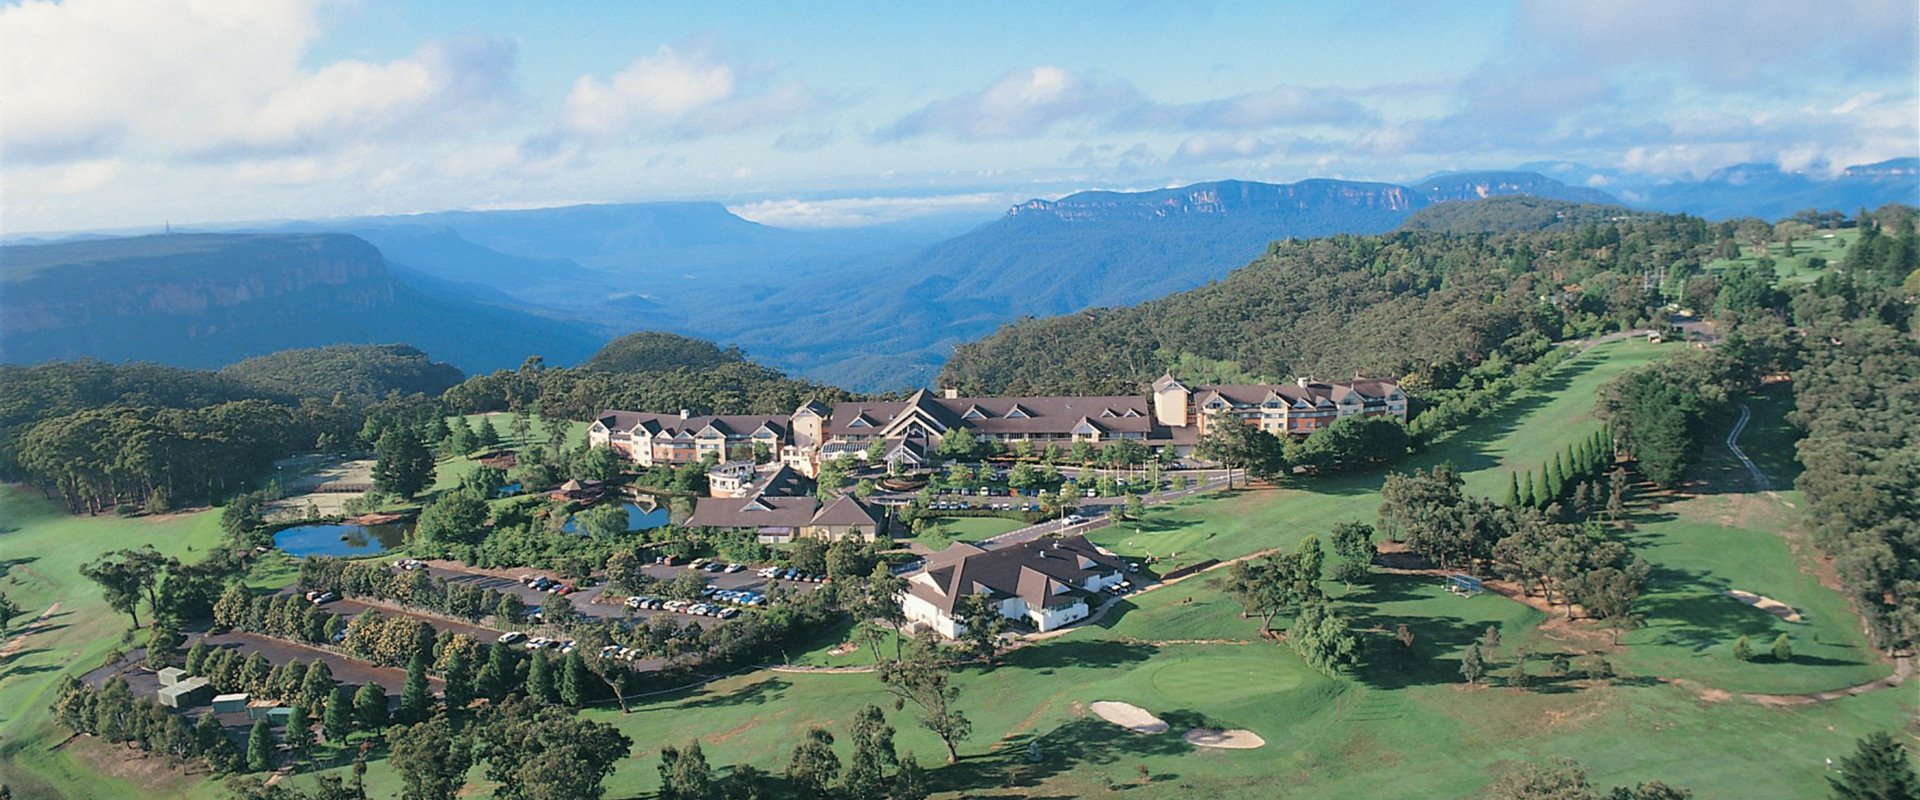 Fairmont Resort M Gallery | Conference Venues Blue Mountains | Conference Venues New South Wales